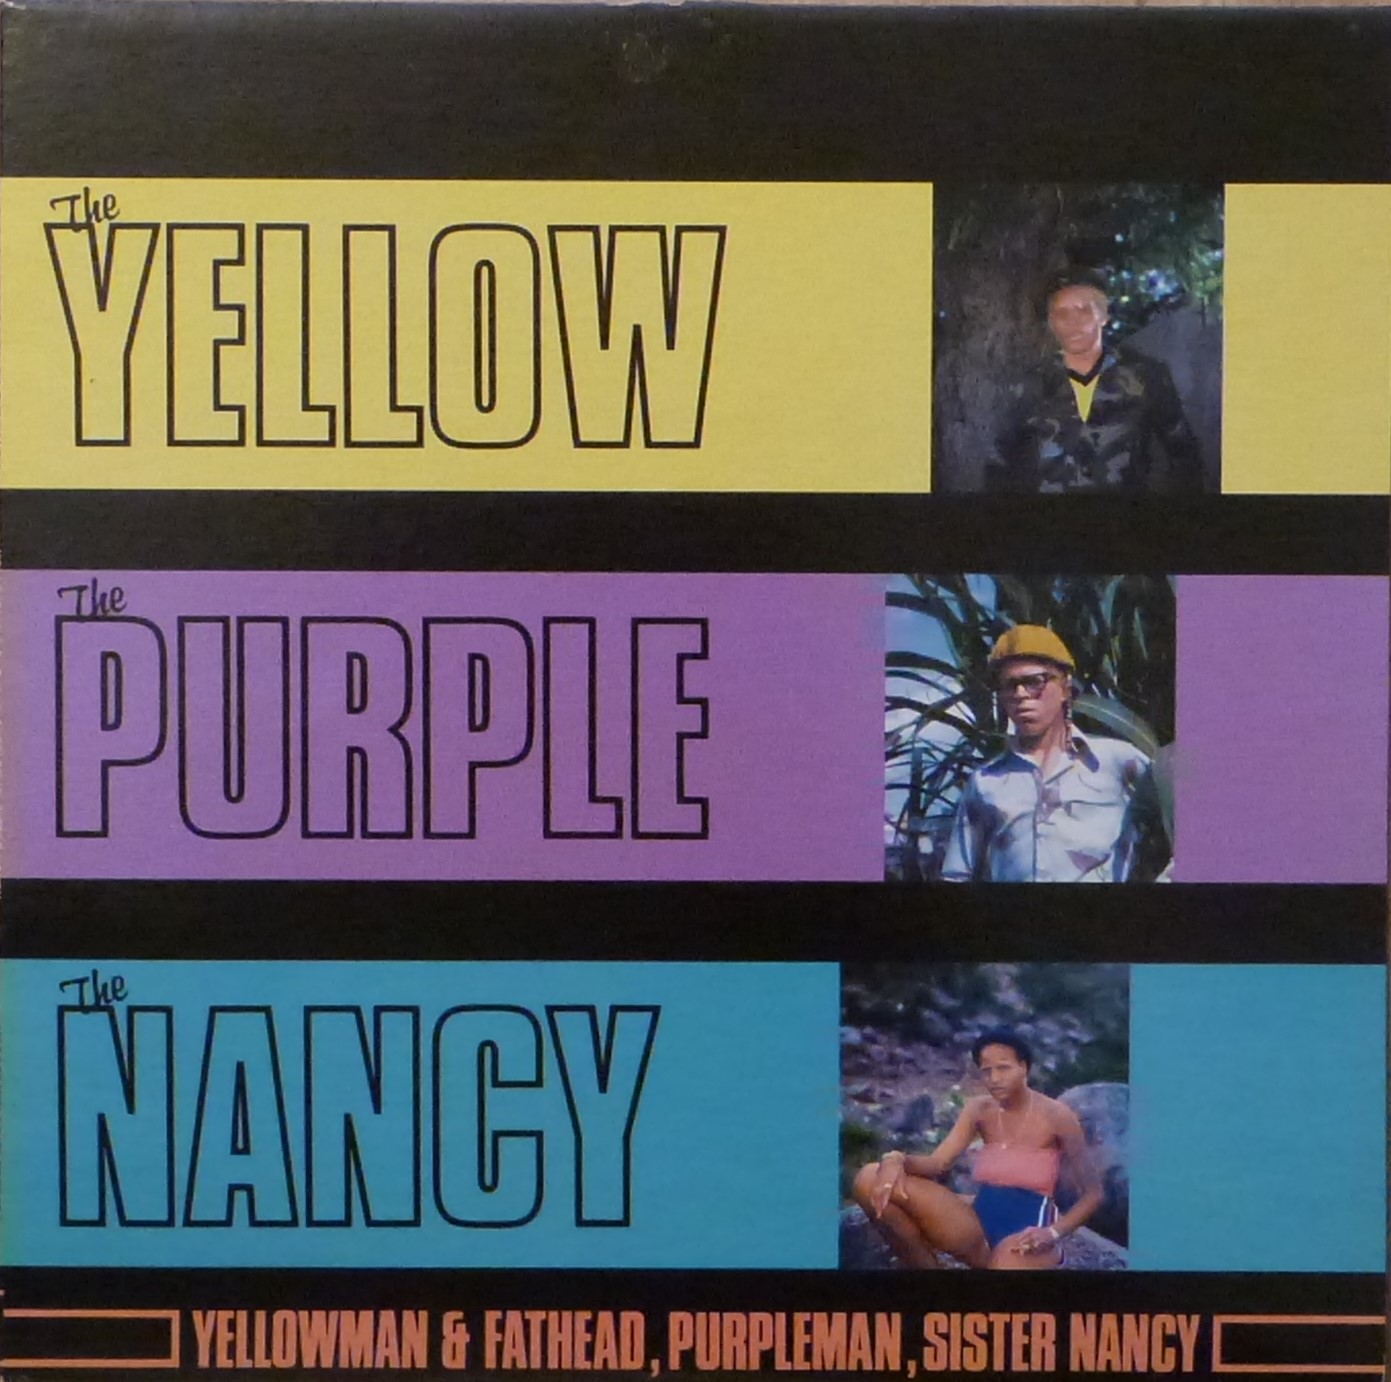 The Yellow, The Purple and the Nancy